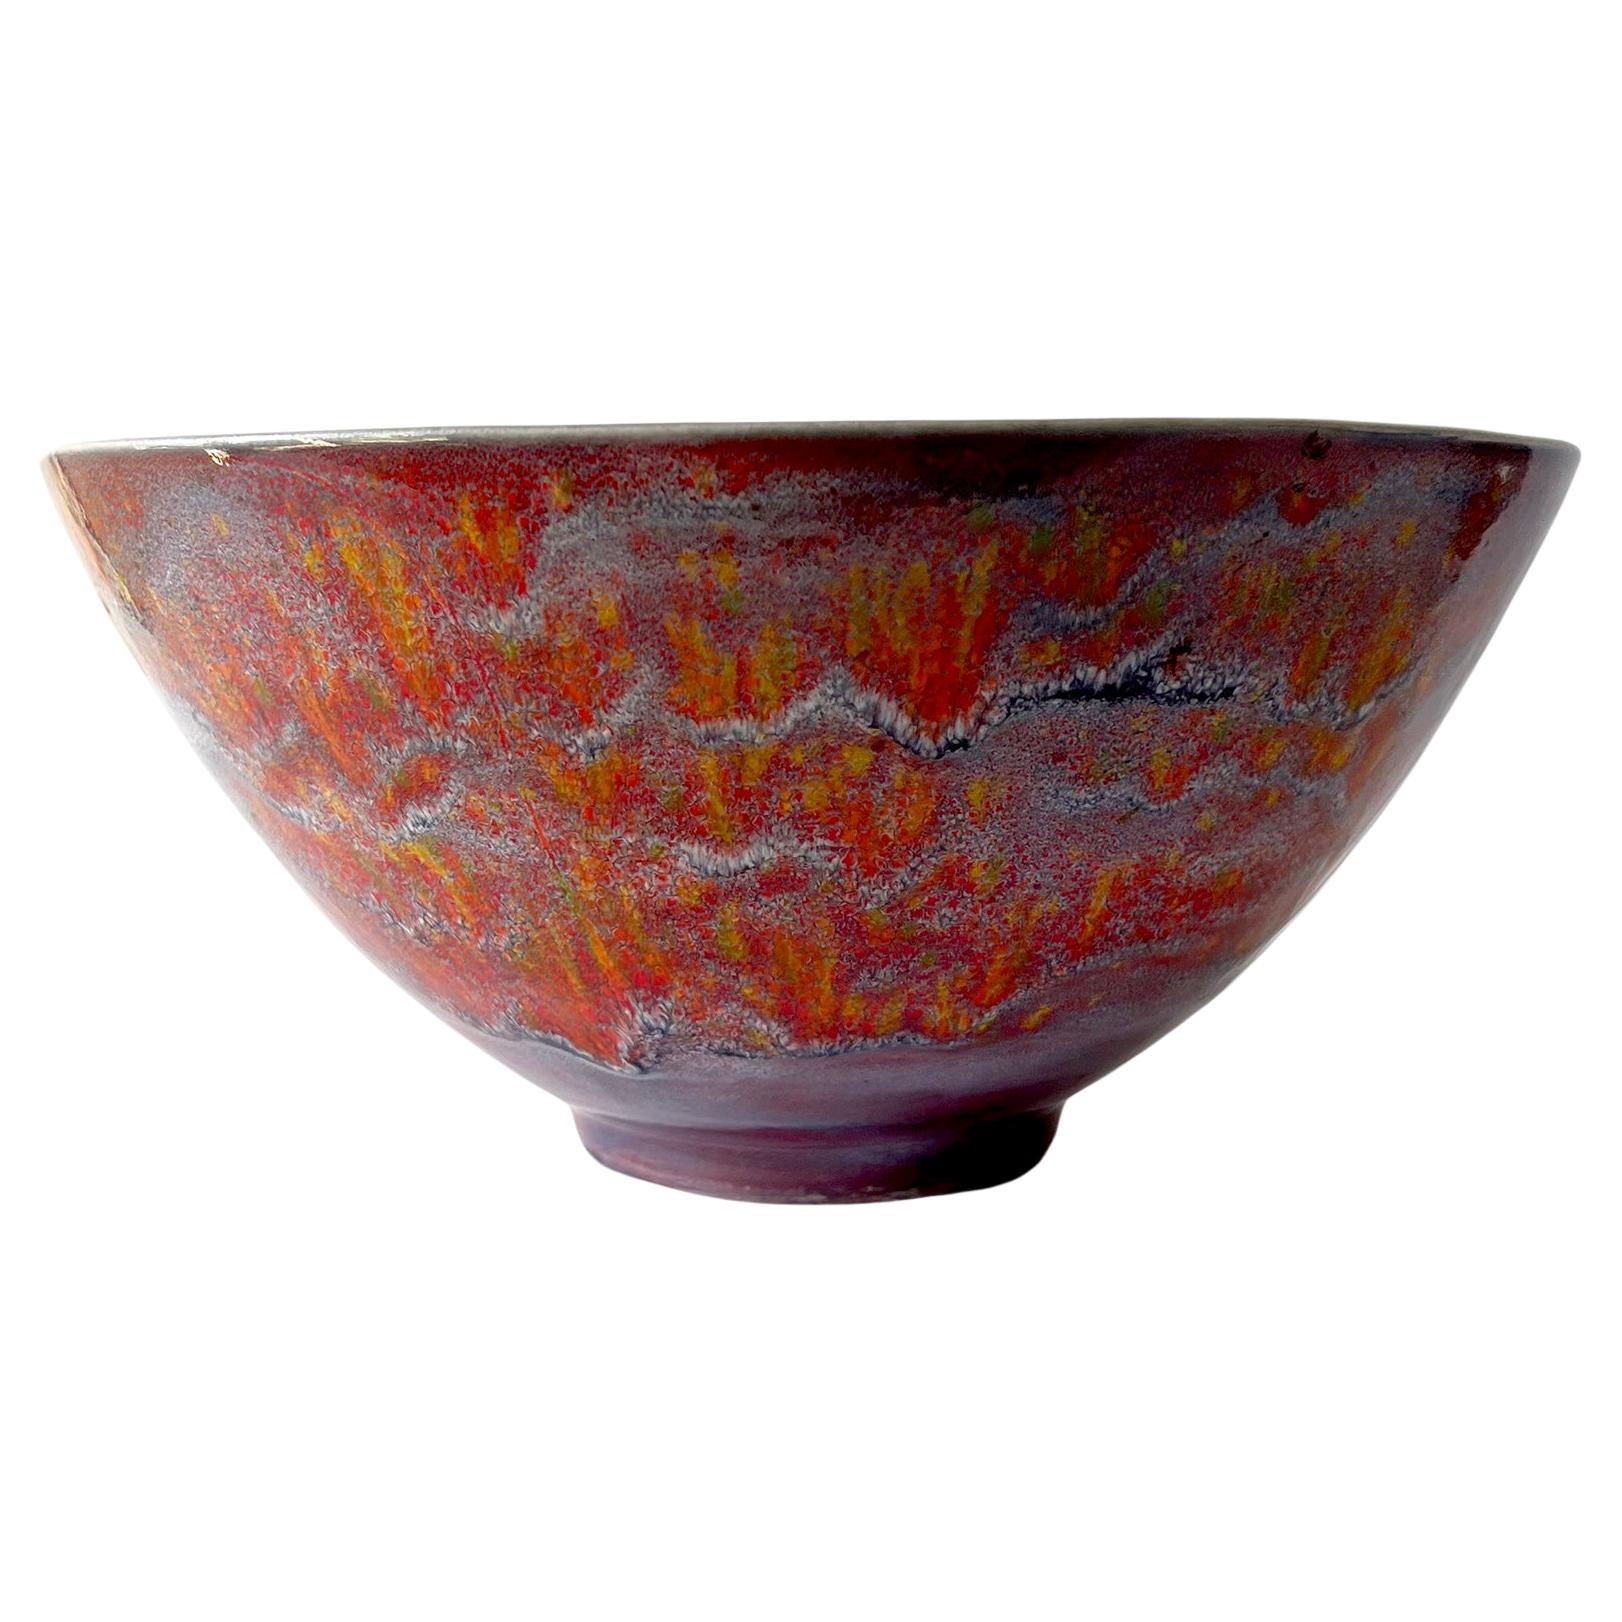 Colorful California studio pottery bowl created by William and Polia Pillin of Los Angeles, California. Bowl measures 5.25